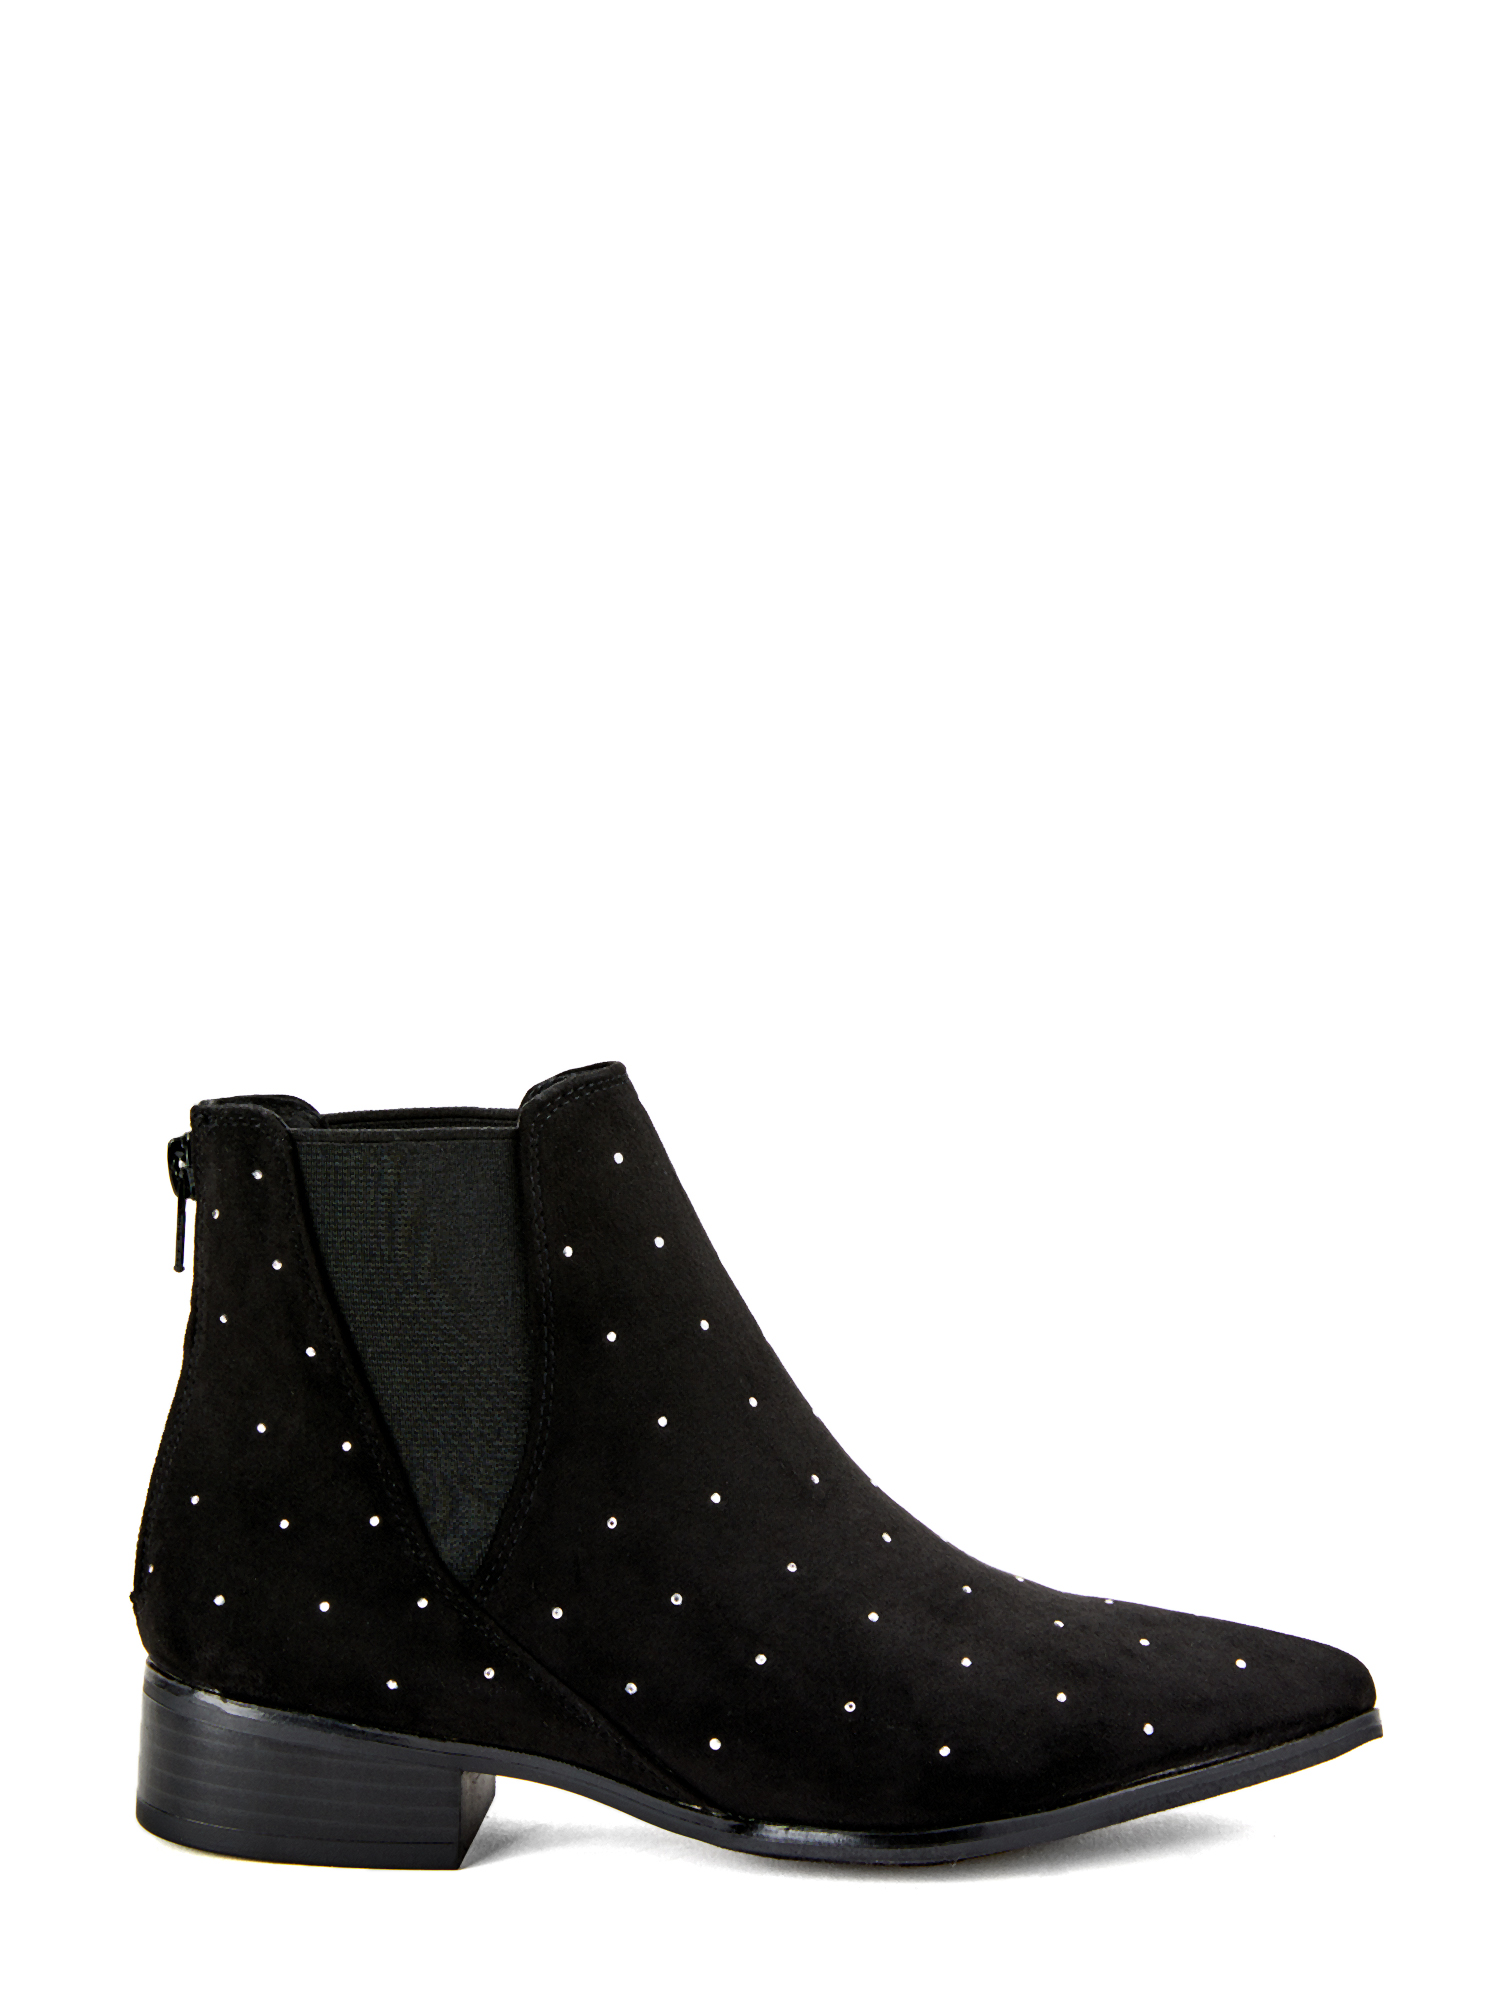 Portland Boot Company Women?s Canny Studded Booties - image 2 of 6